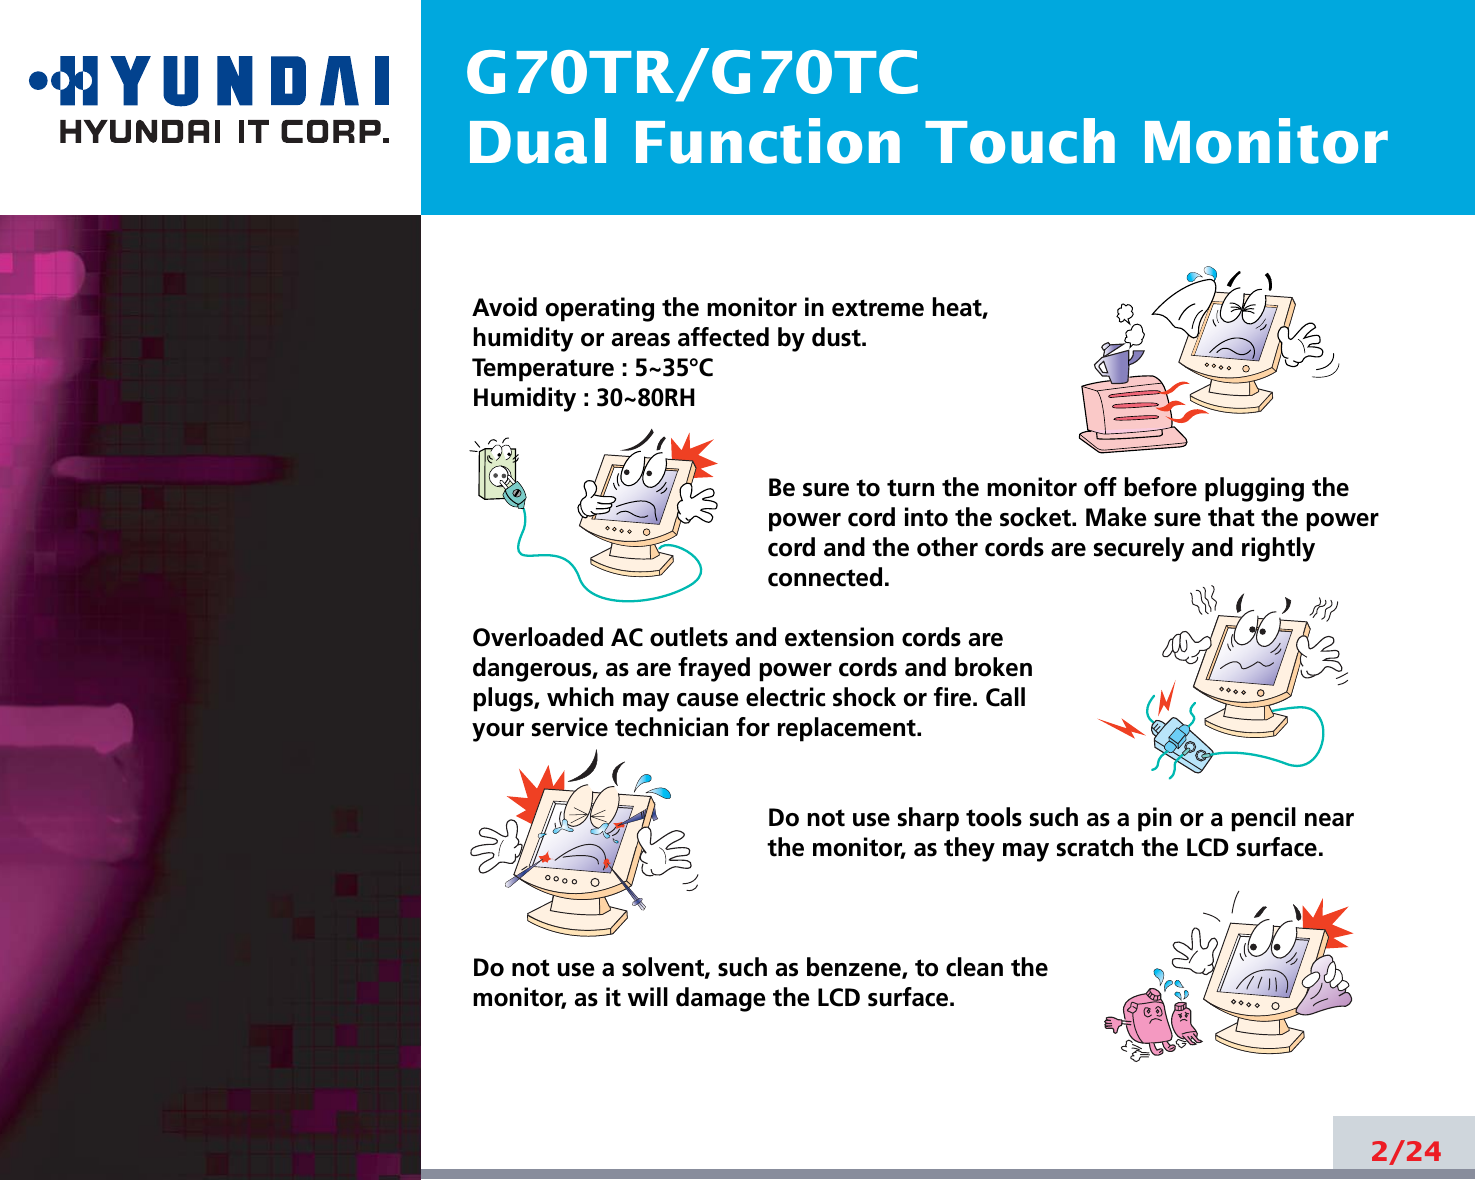 G70TR/G70TCDual Function Touch Monitor2/24Avoid operating the monitor in extreme heat, humidity or areas affected by dust. Temperature : 5~35°CHumidity : 30~80RH Be sure to turn the monitor off before plugging thepower cord into the socket. Make sure that the powercord and the other cords are securely and rightlyconnected.Overloaded AC outlets and extension cords are dangerous, as are frayed power cords and broken plugs, which may cause electric shock or fire. Call your service technician for replacement.Do not use sharp tools such as a pin or a pencil near the monitor, as they may scratch the LCD surface.Do not use a solvent, such as benzene, to clean the monitor, as it will damage the LCD surface.